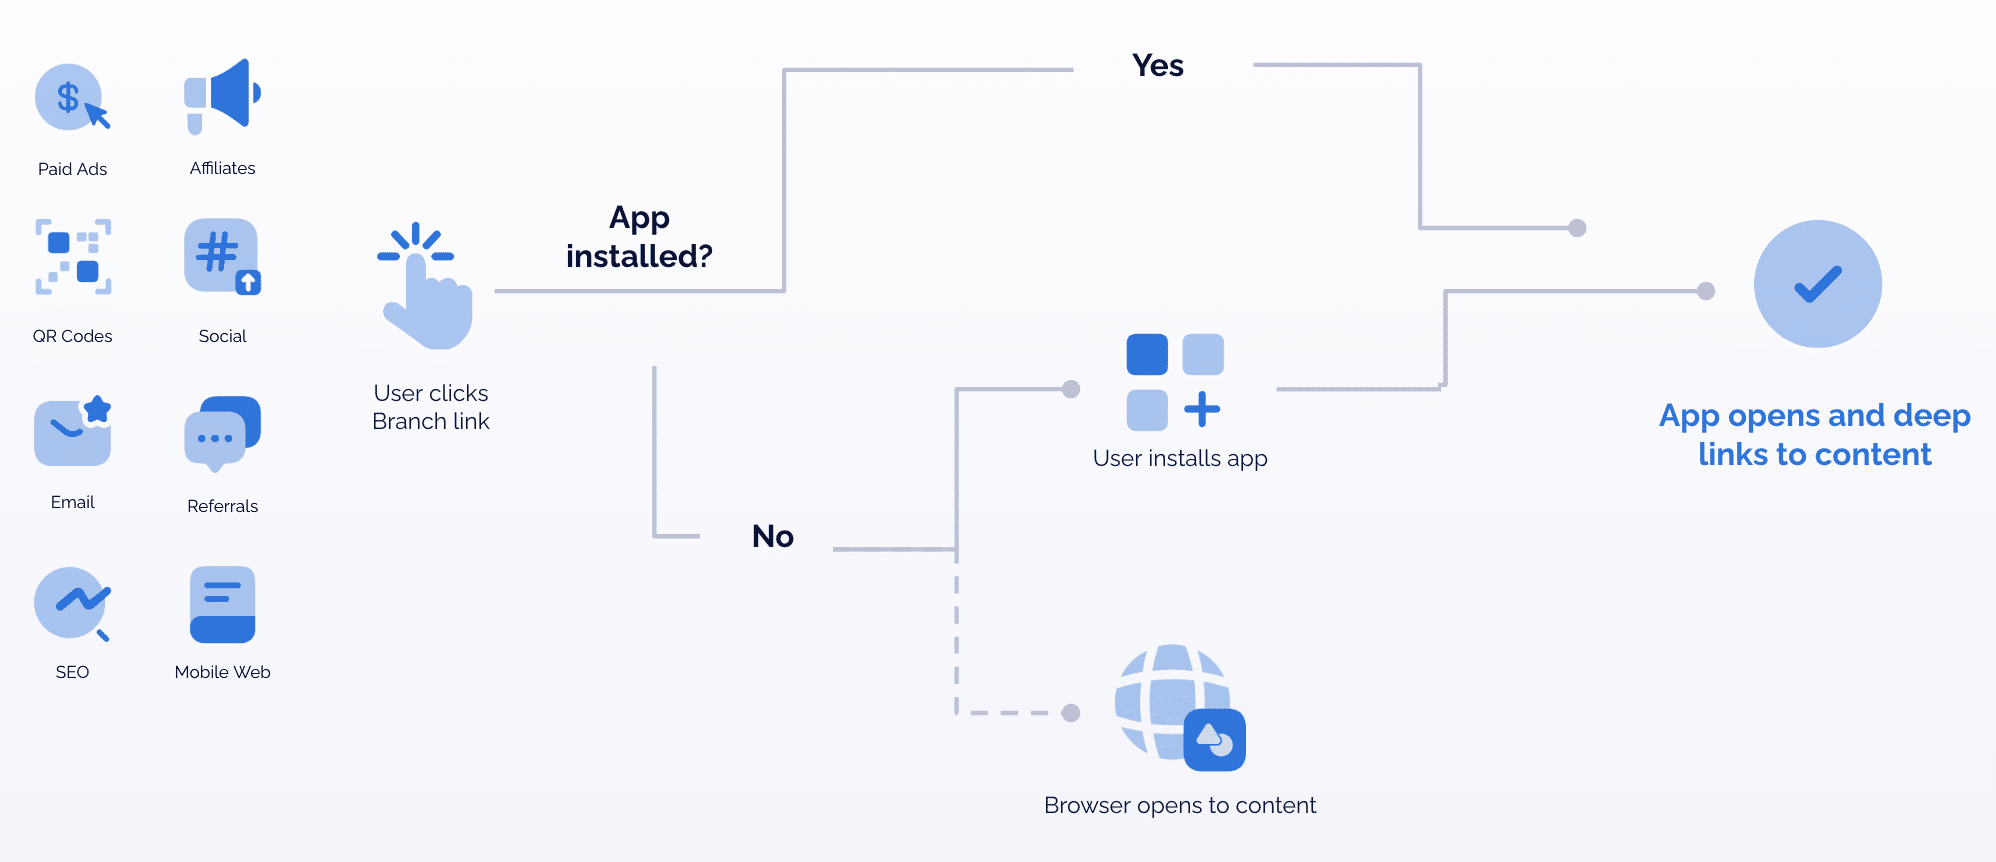 Flow chart showing the user flow from when a user clicks a Branch link to when the app opens. If the app is installed, when a user clicks a Branch link they are automatically routed to the in-app content. If the app is not installed, the user is taken to the app store to install the app then to the in-app content, or the web browser opens to the content -- depending on the brand's deep link routing logic. 